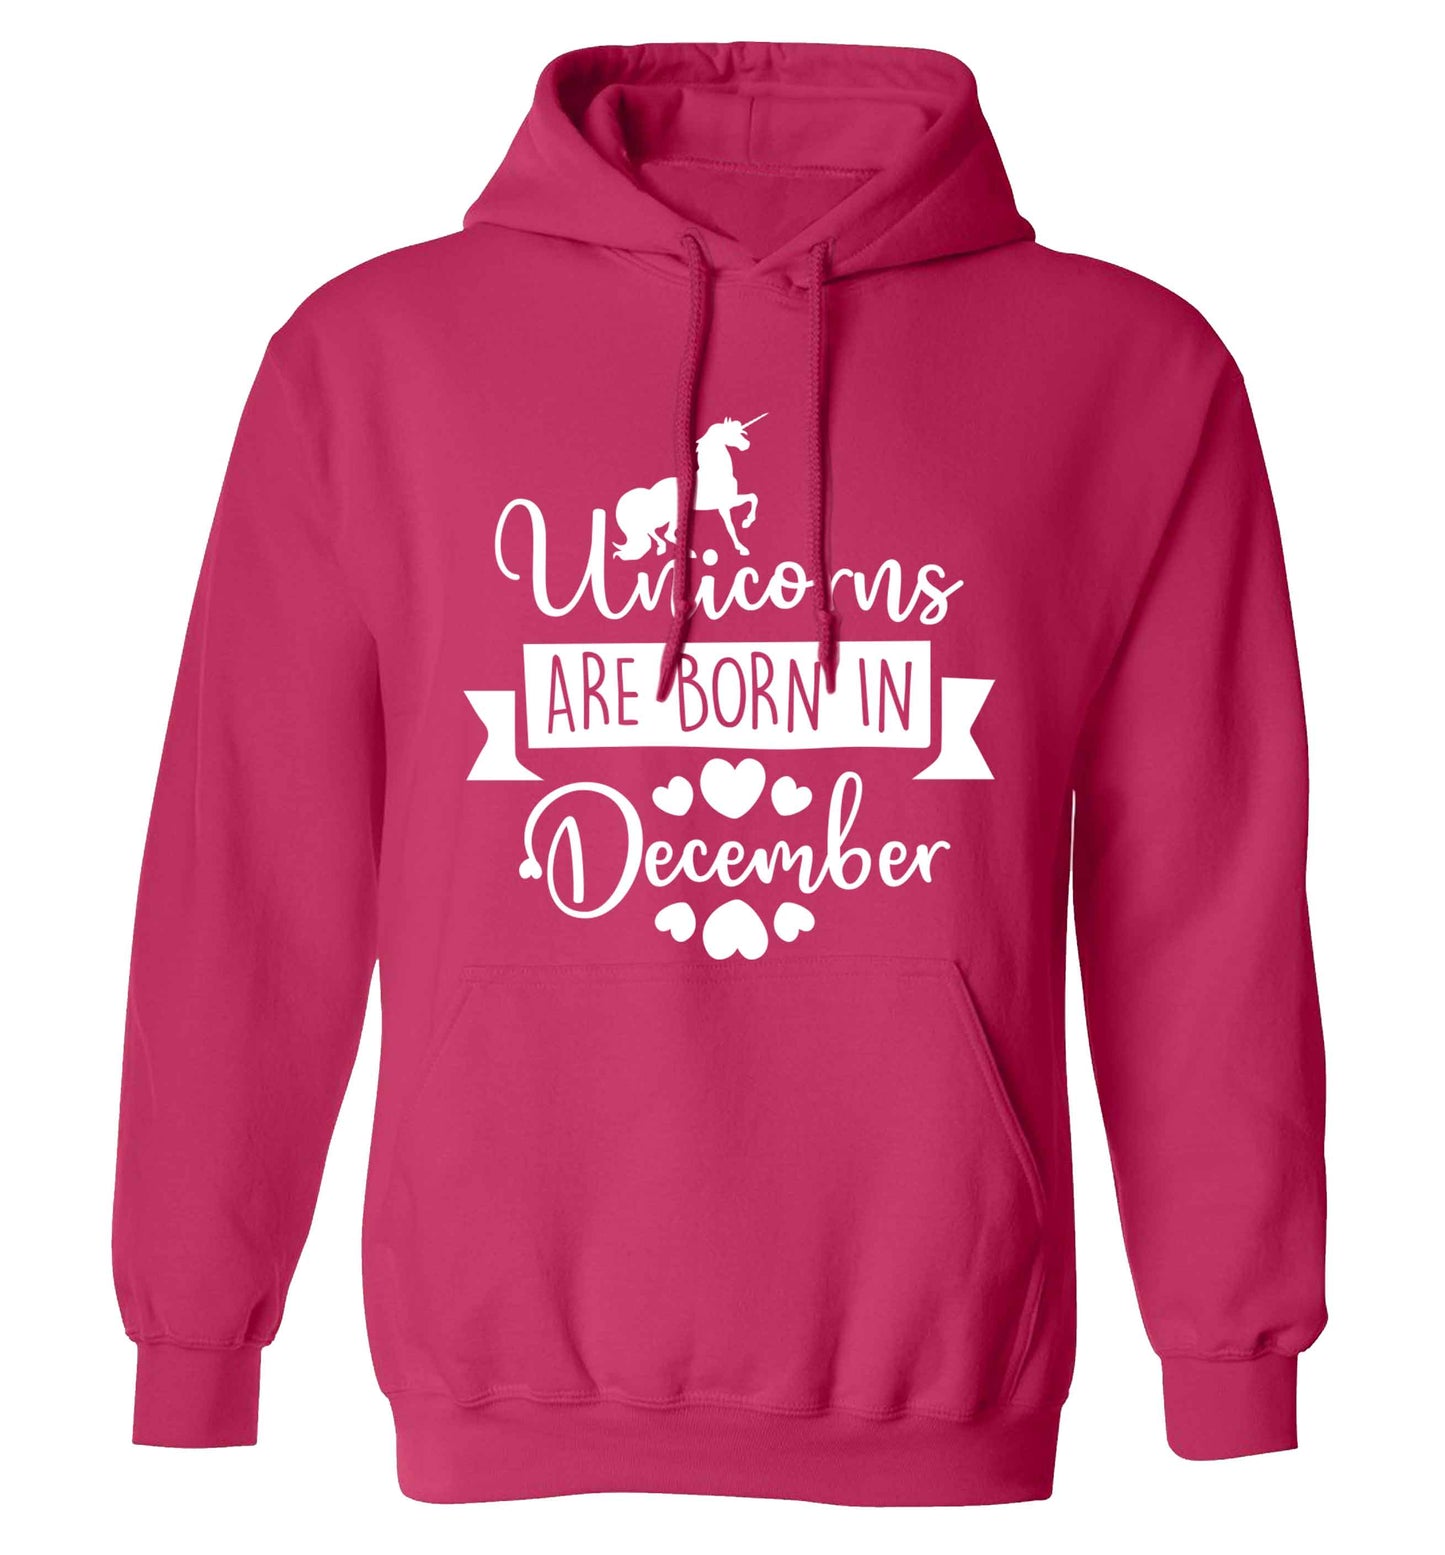 Unicorns are born in December adults unisex pink hoodie 2XL